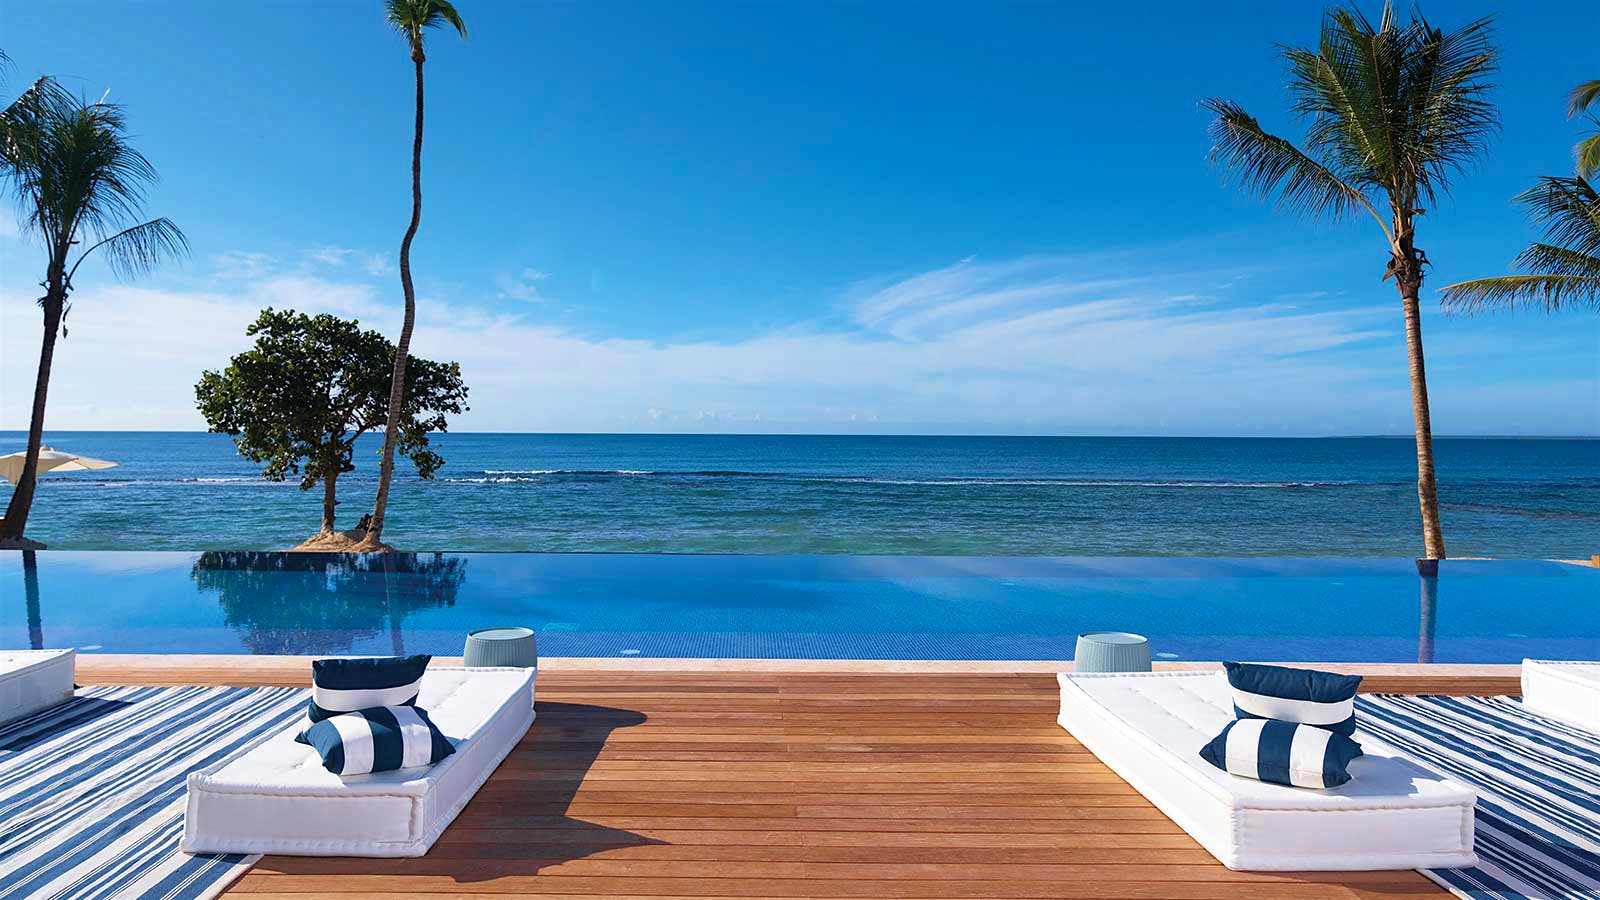 Each villa has a private pool, some are on the ocean and others overlook one of the golf courses.